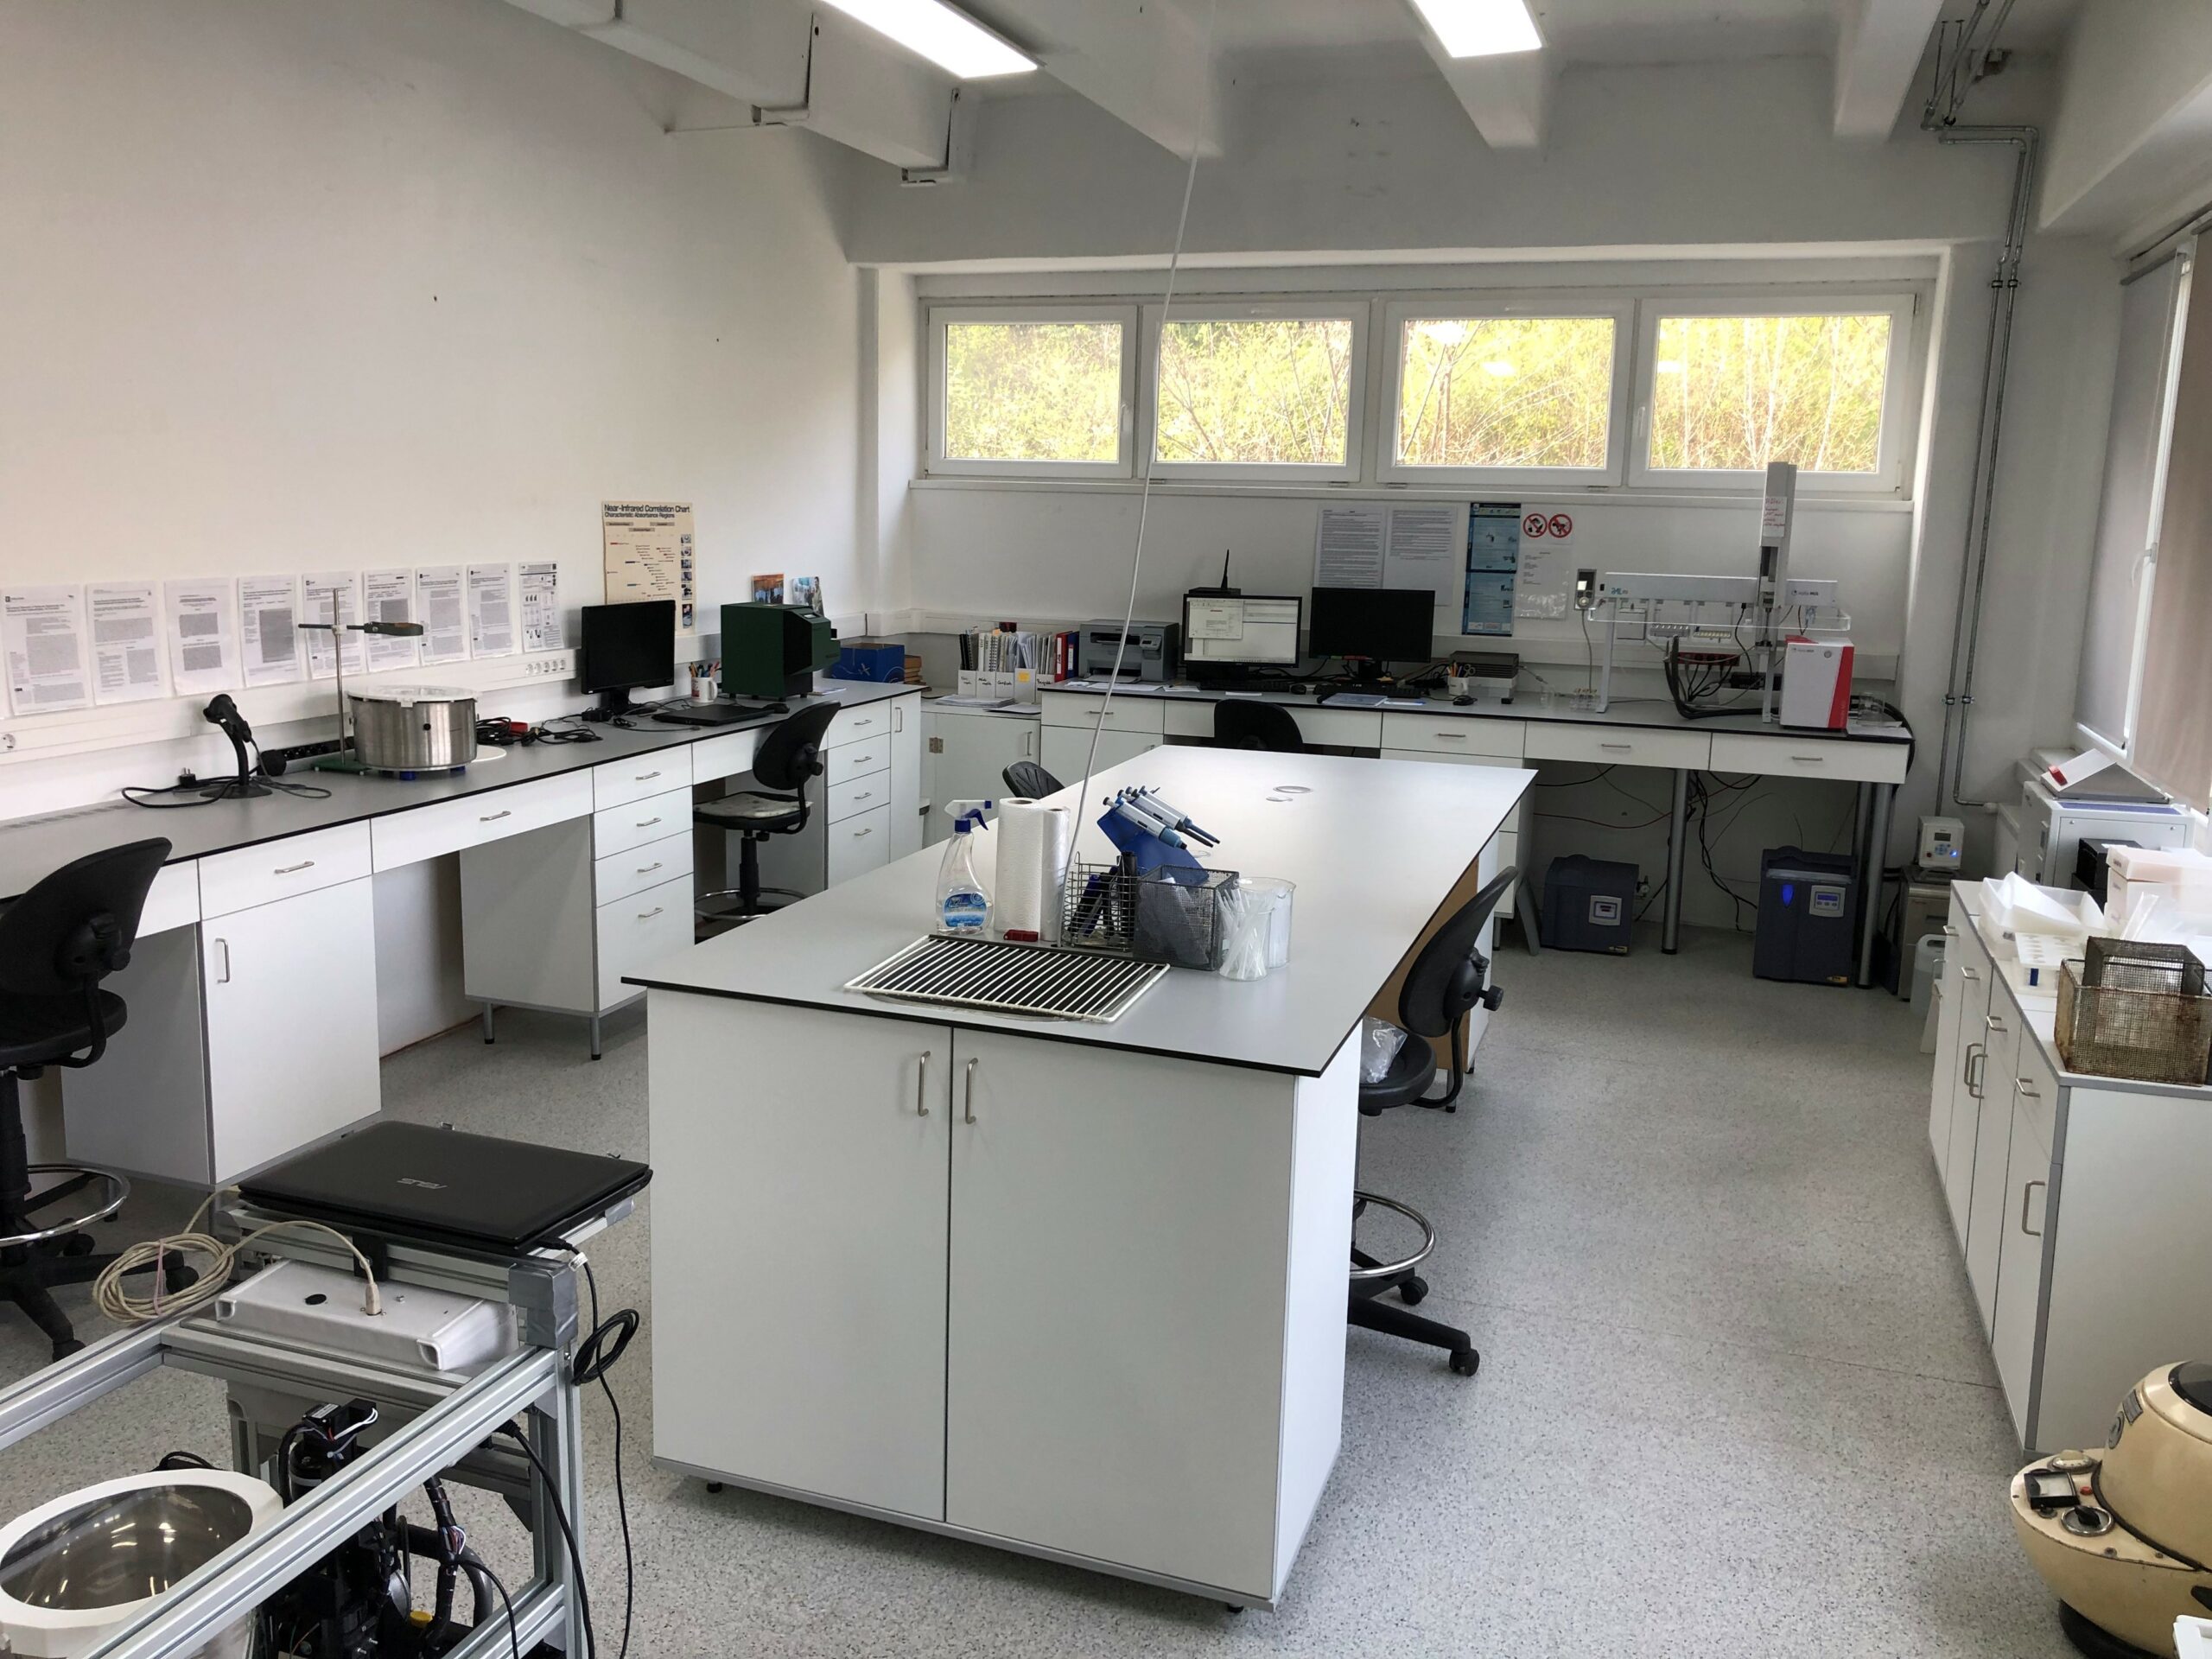 The Correltech Laboratory continues its work in a new facility